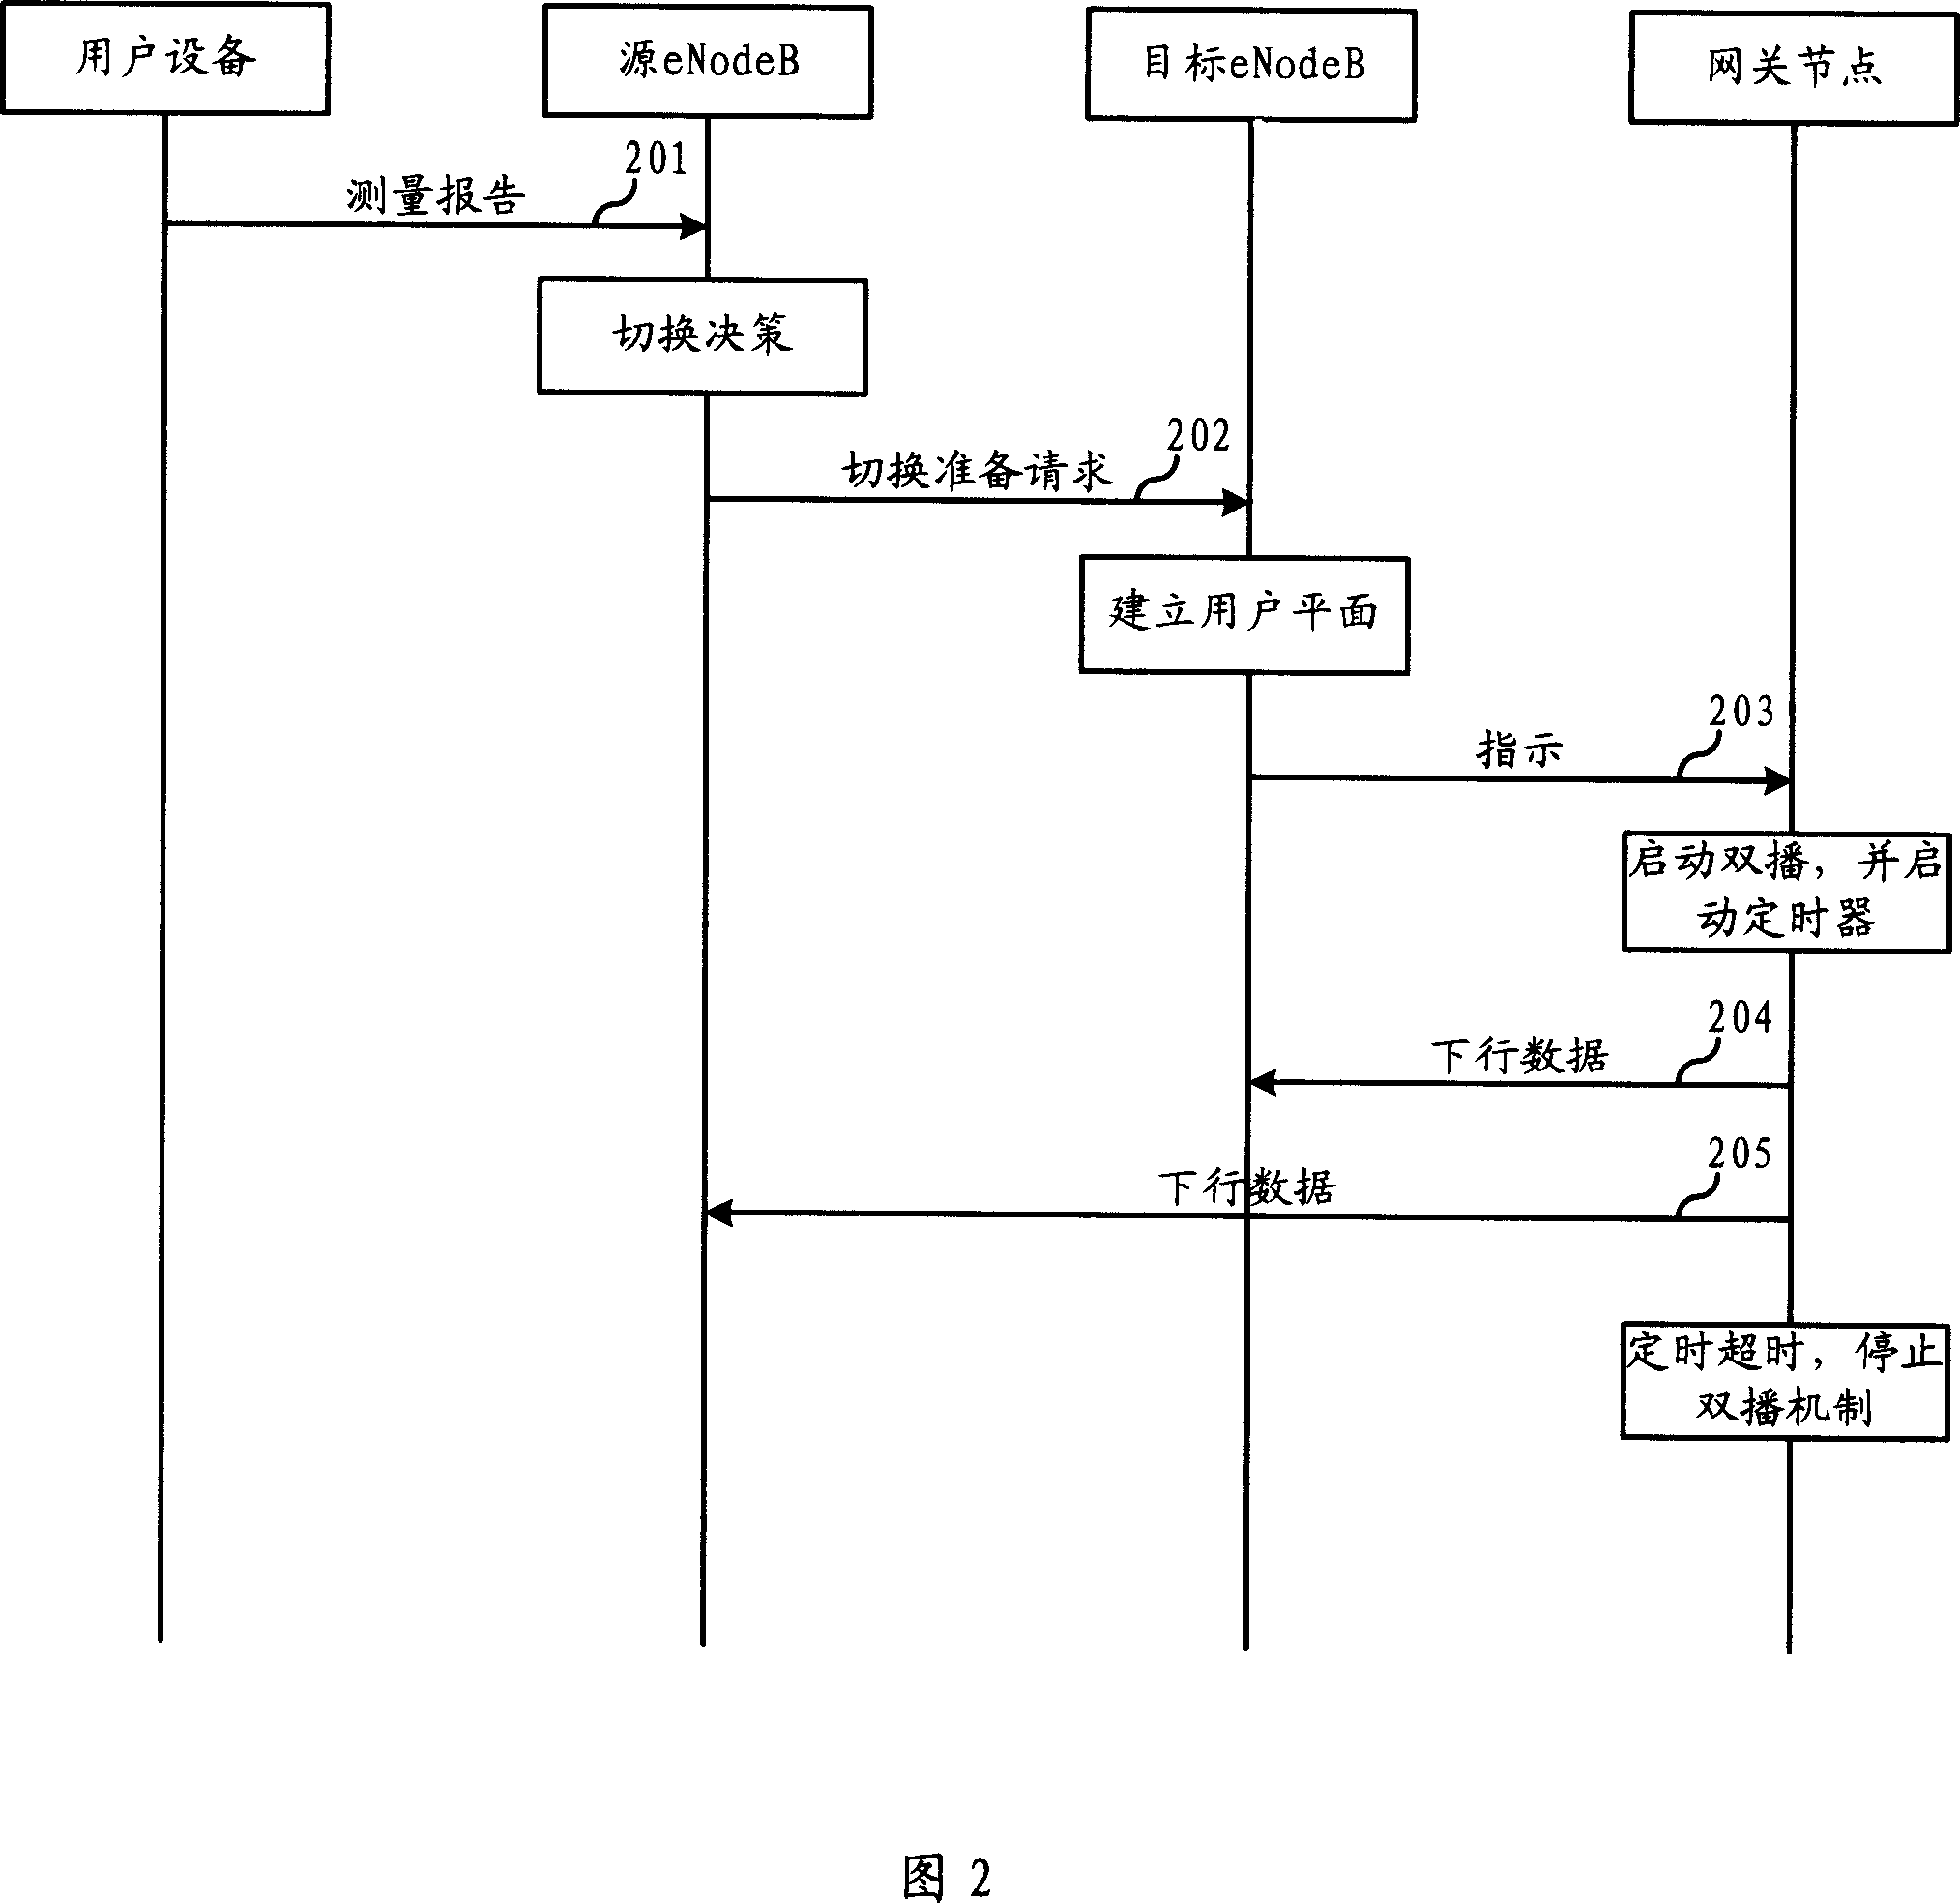 Switching method of the user device in the long evolving network